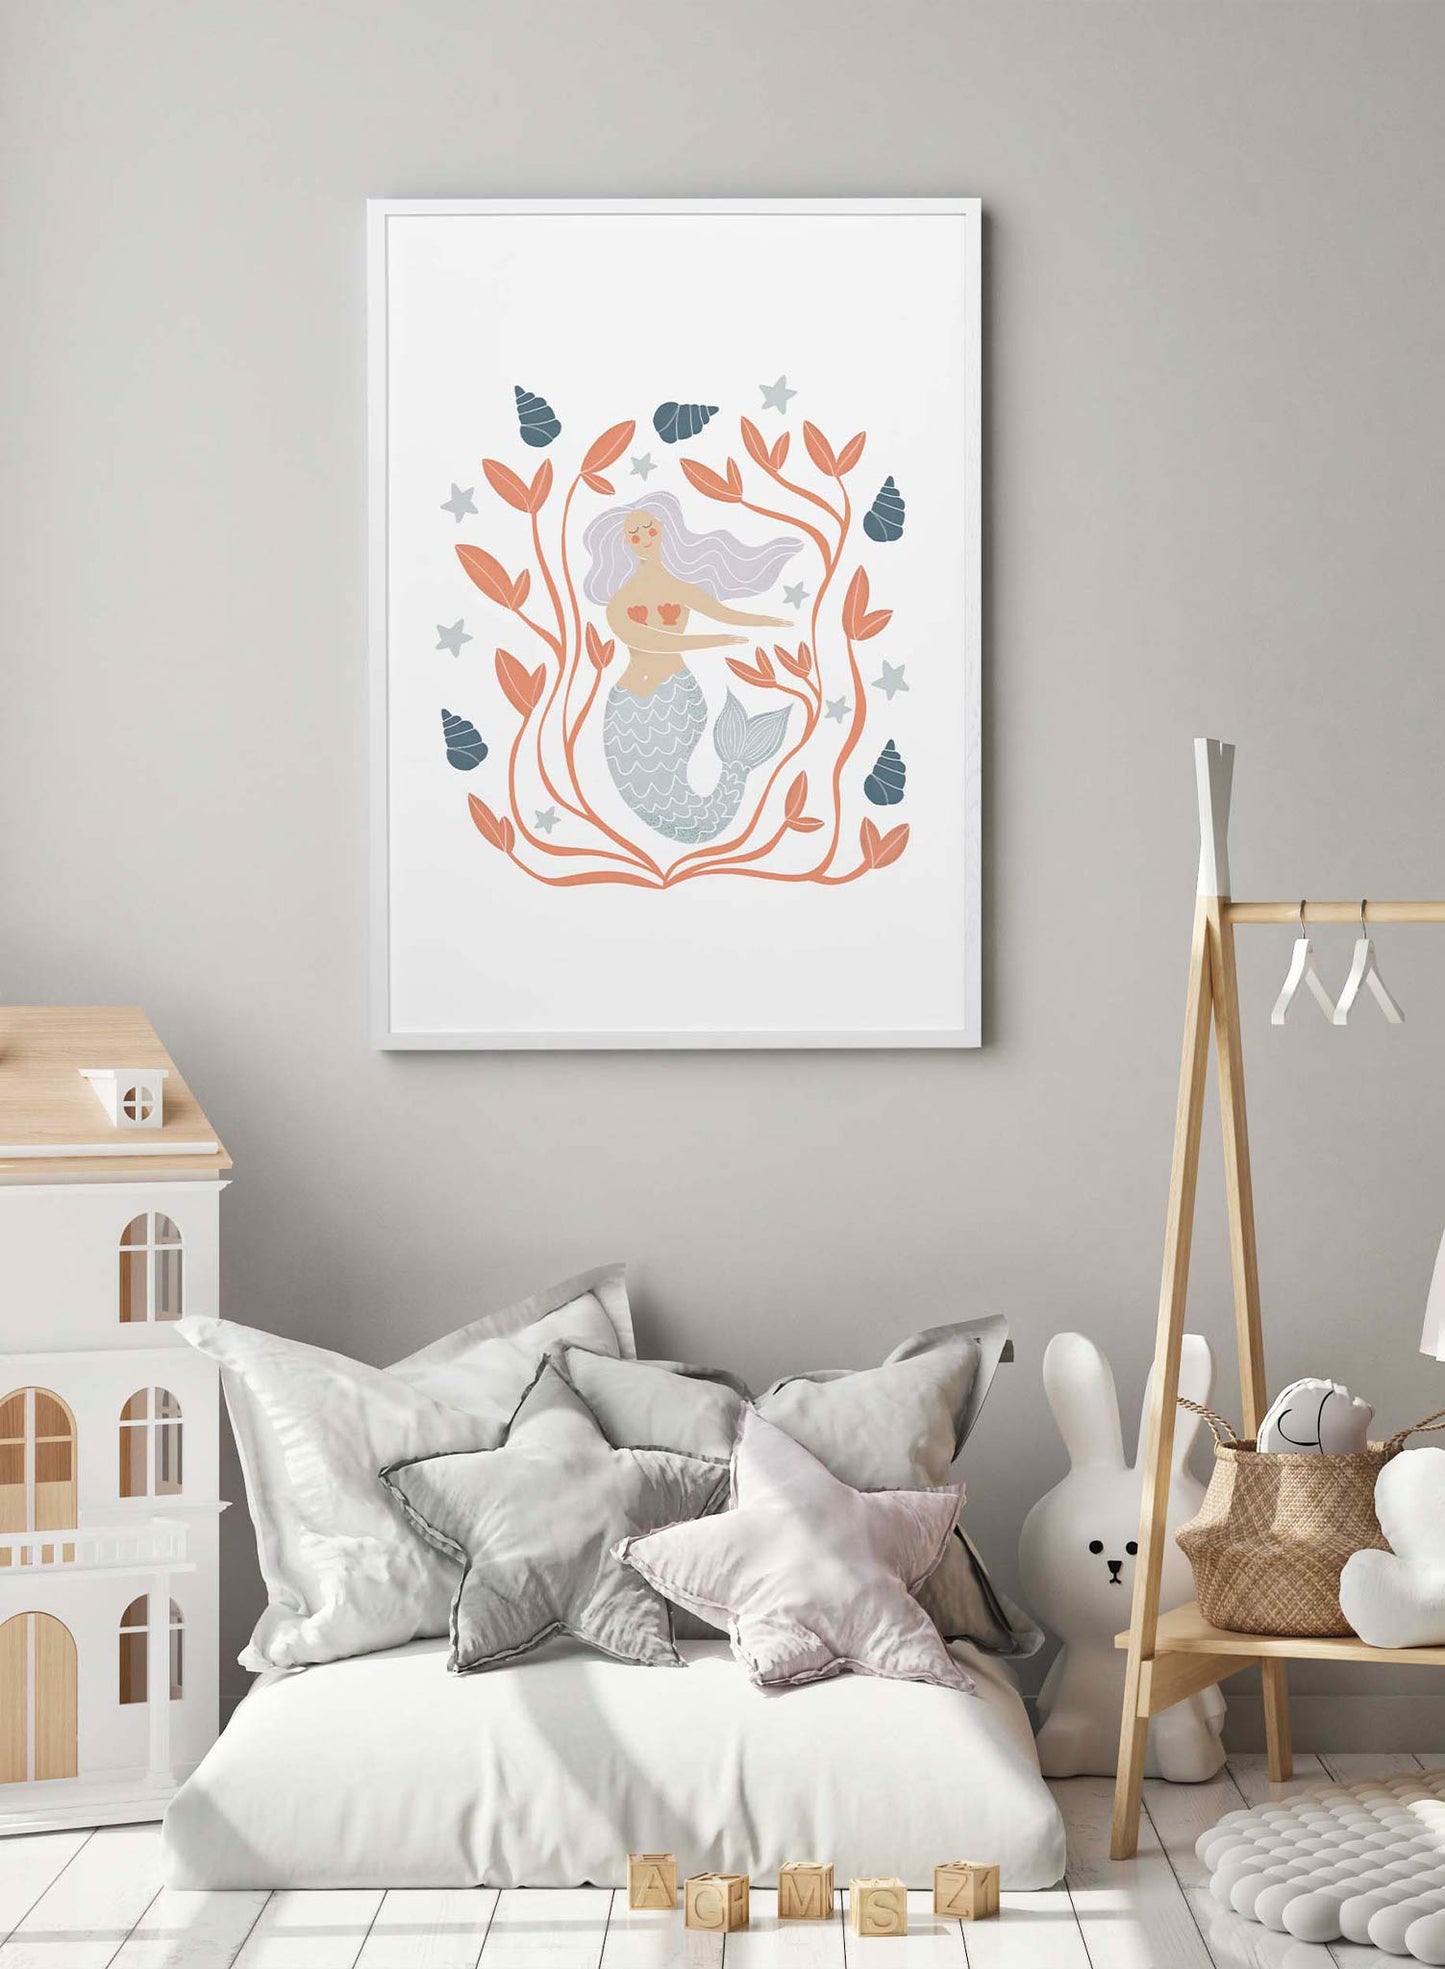 Mermaid is a minimalist illustration by Opposite Wall of a beautiful mermaid surrounded by plants and seashells.